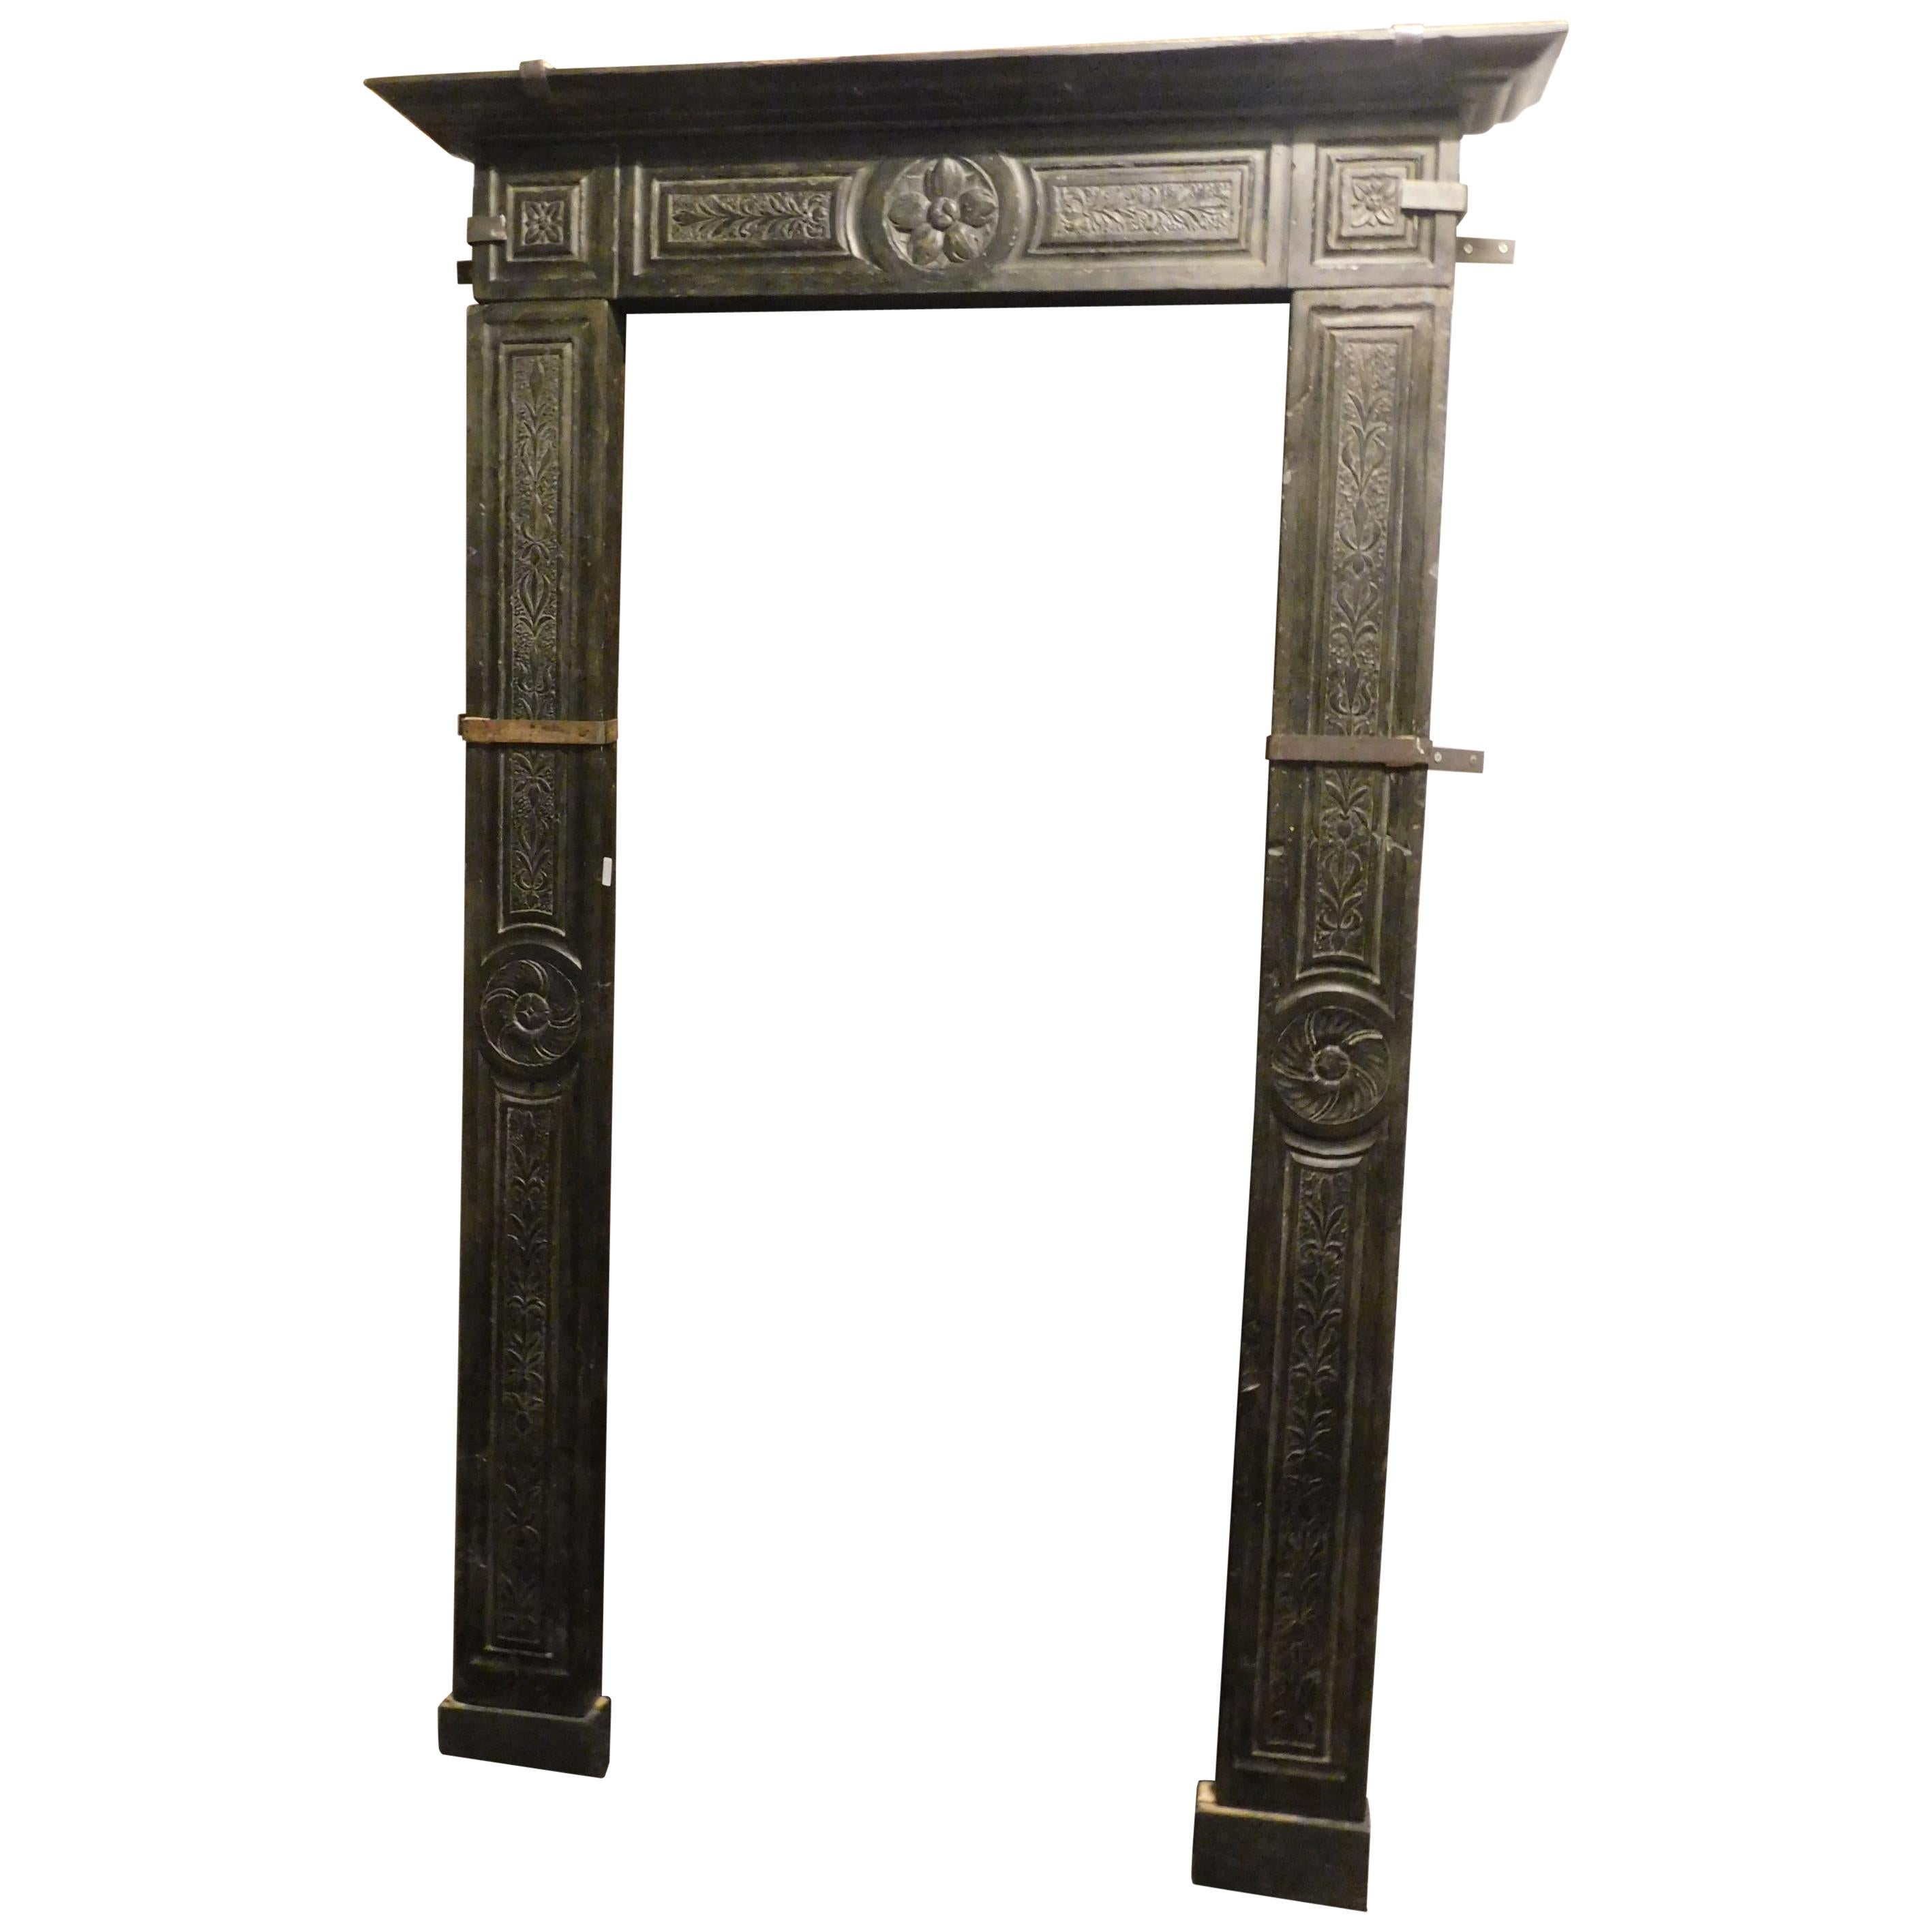 Antique Slate Portal for Door, Black Frame from Genoa, 16th Century, Italy